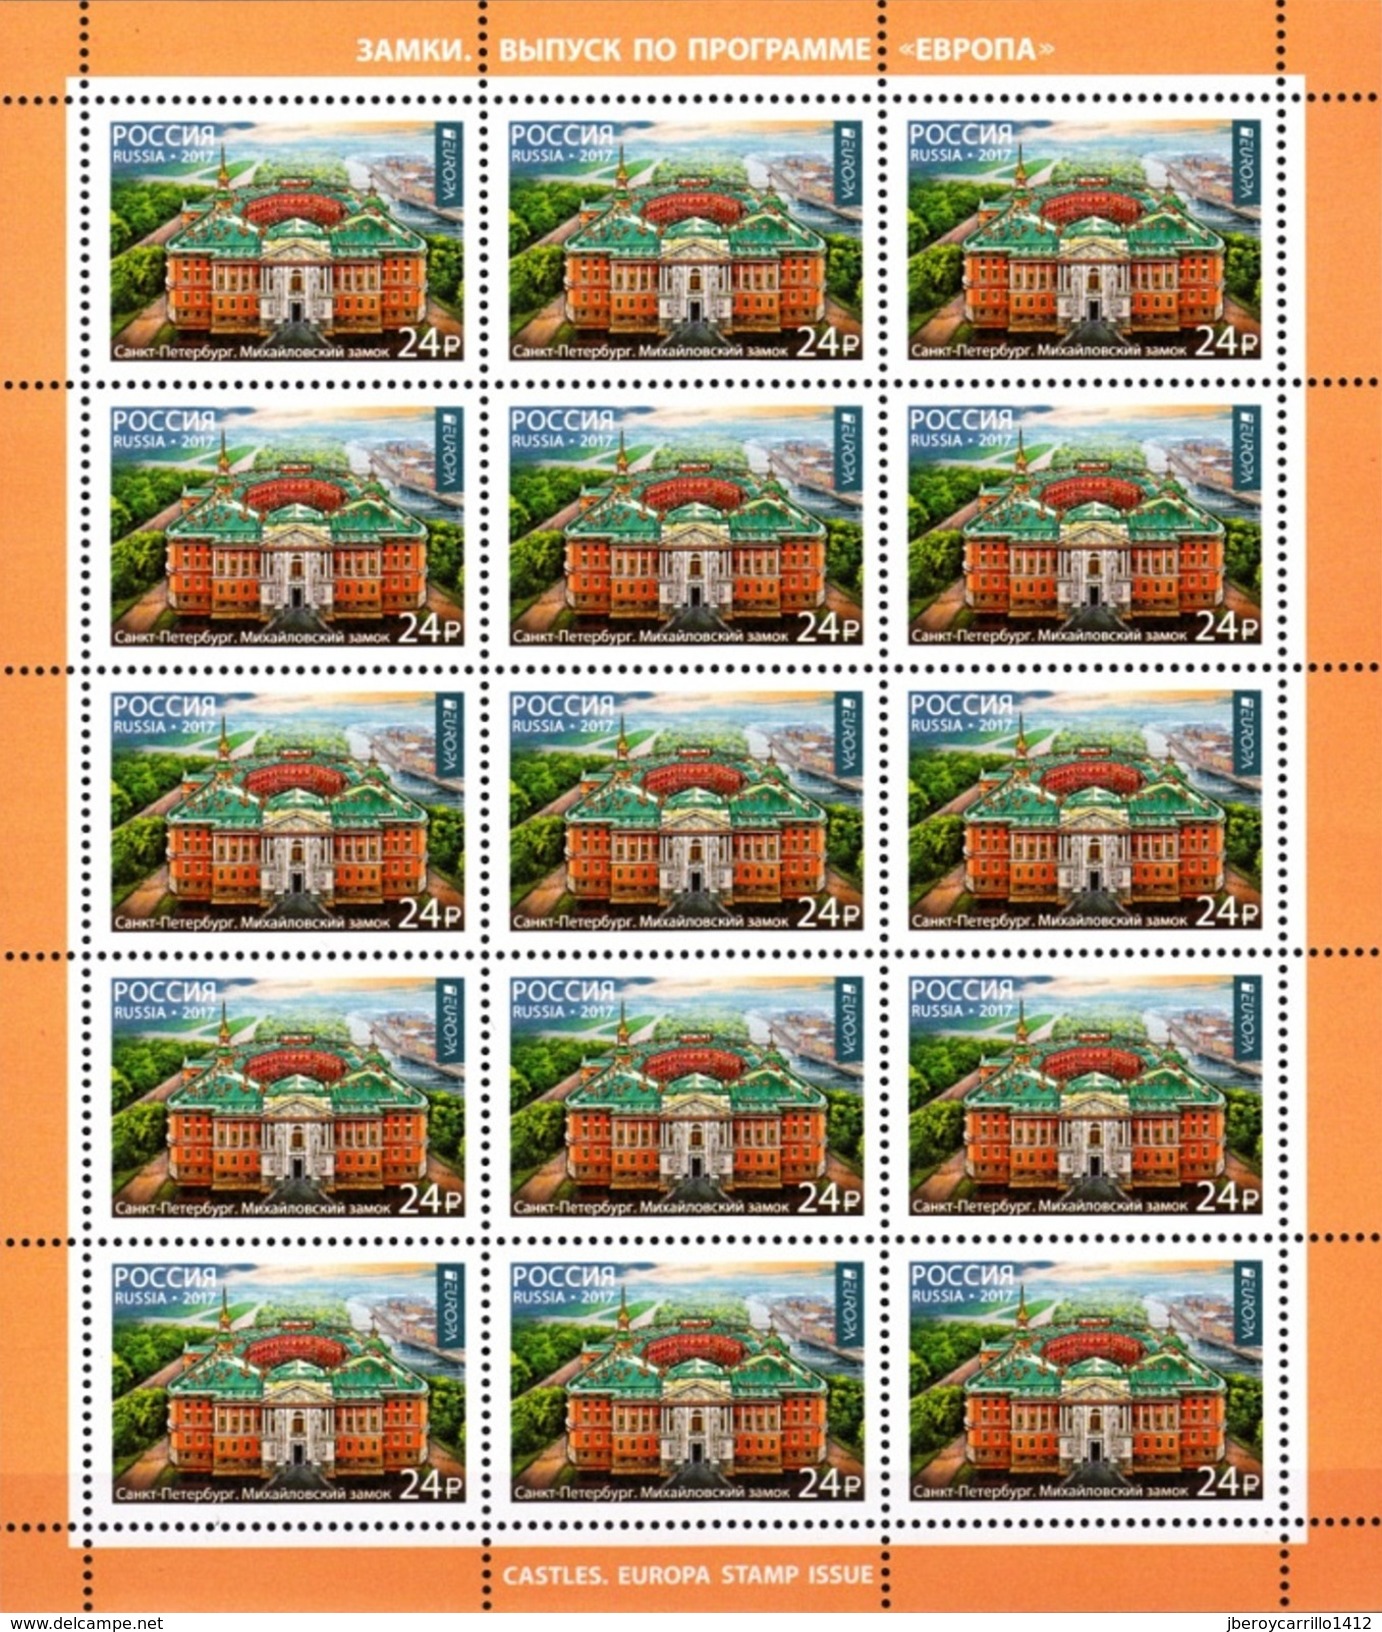 RUSSIA /RUSSLAND/ RUSIA/  -EUROPA 2017- -" CASTLES - CASTILLOS - CHATEAUX "-  SET Of 1 Stamp In SHEETLET Of 15 - 2017